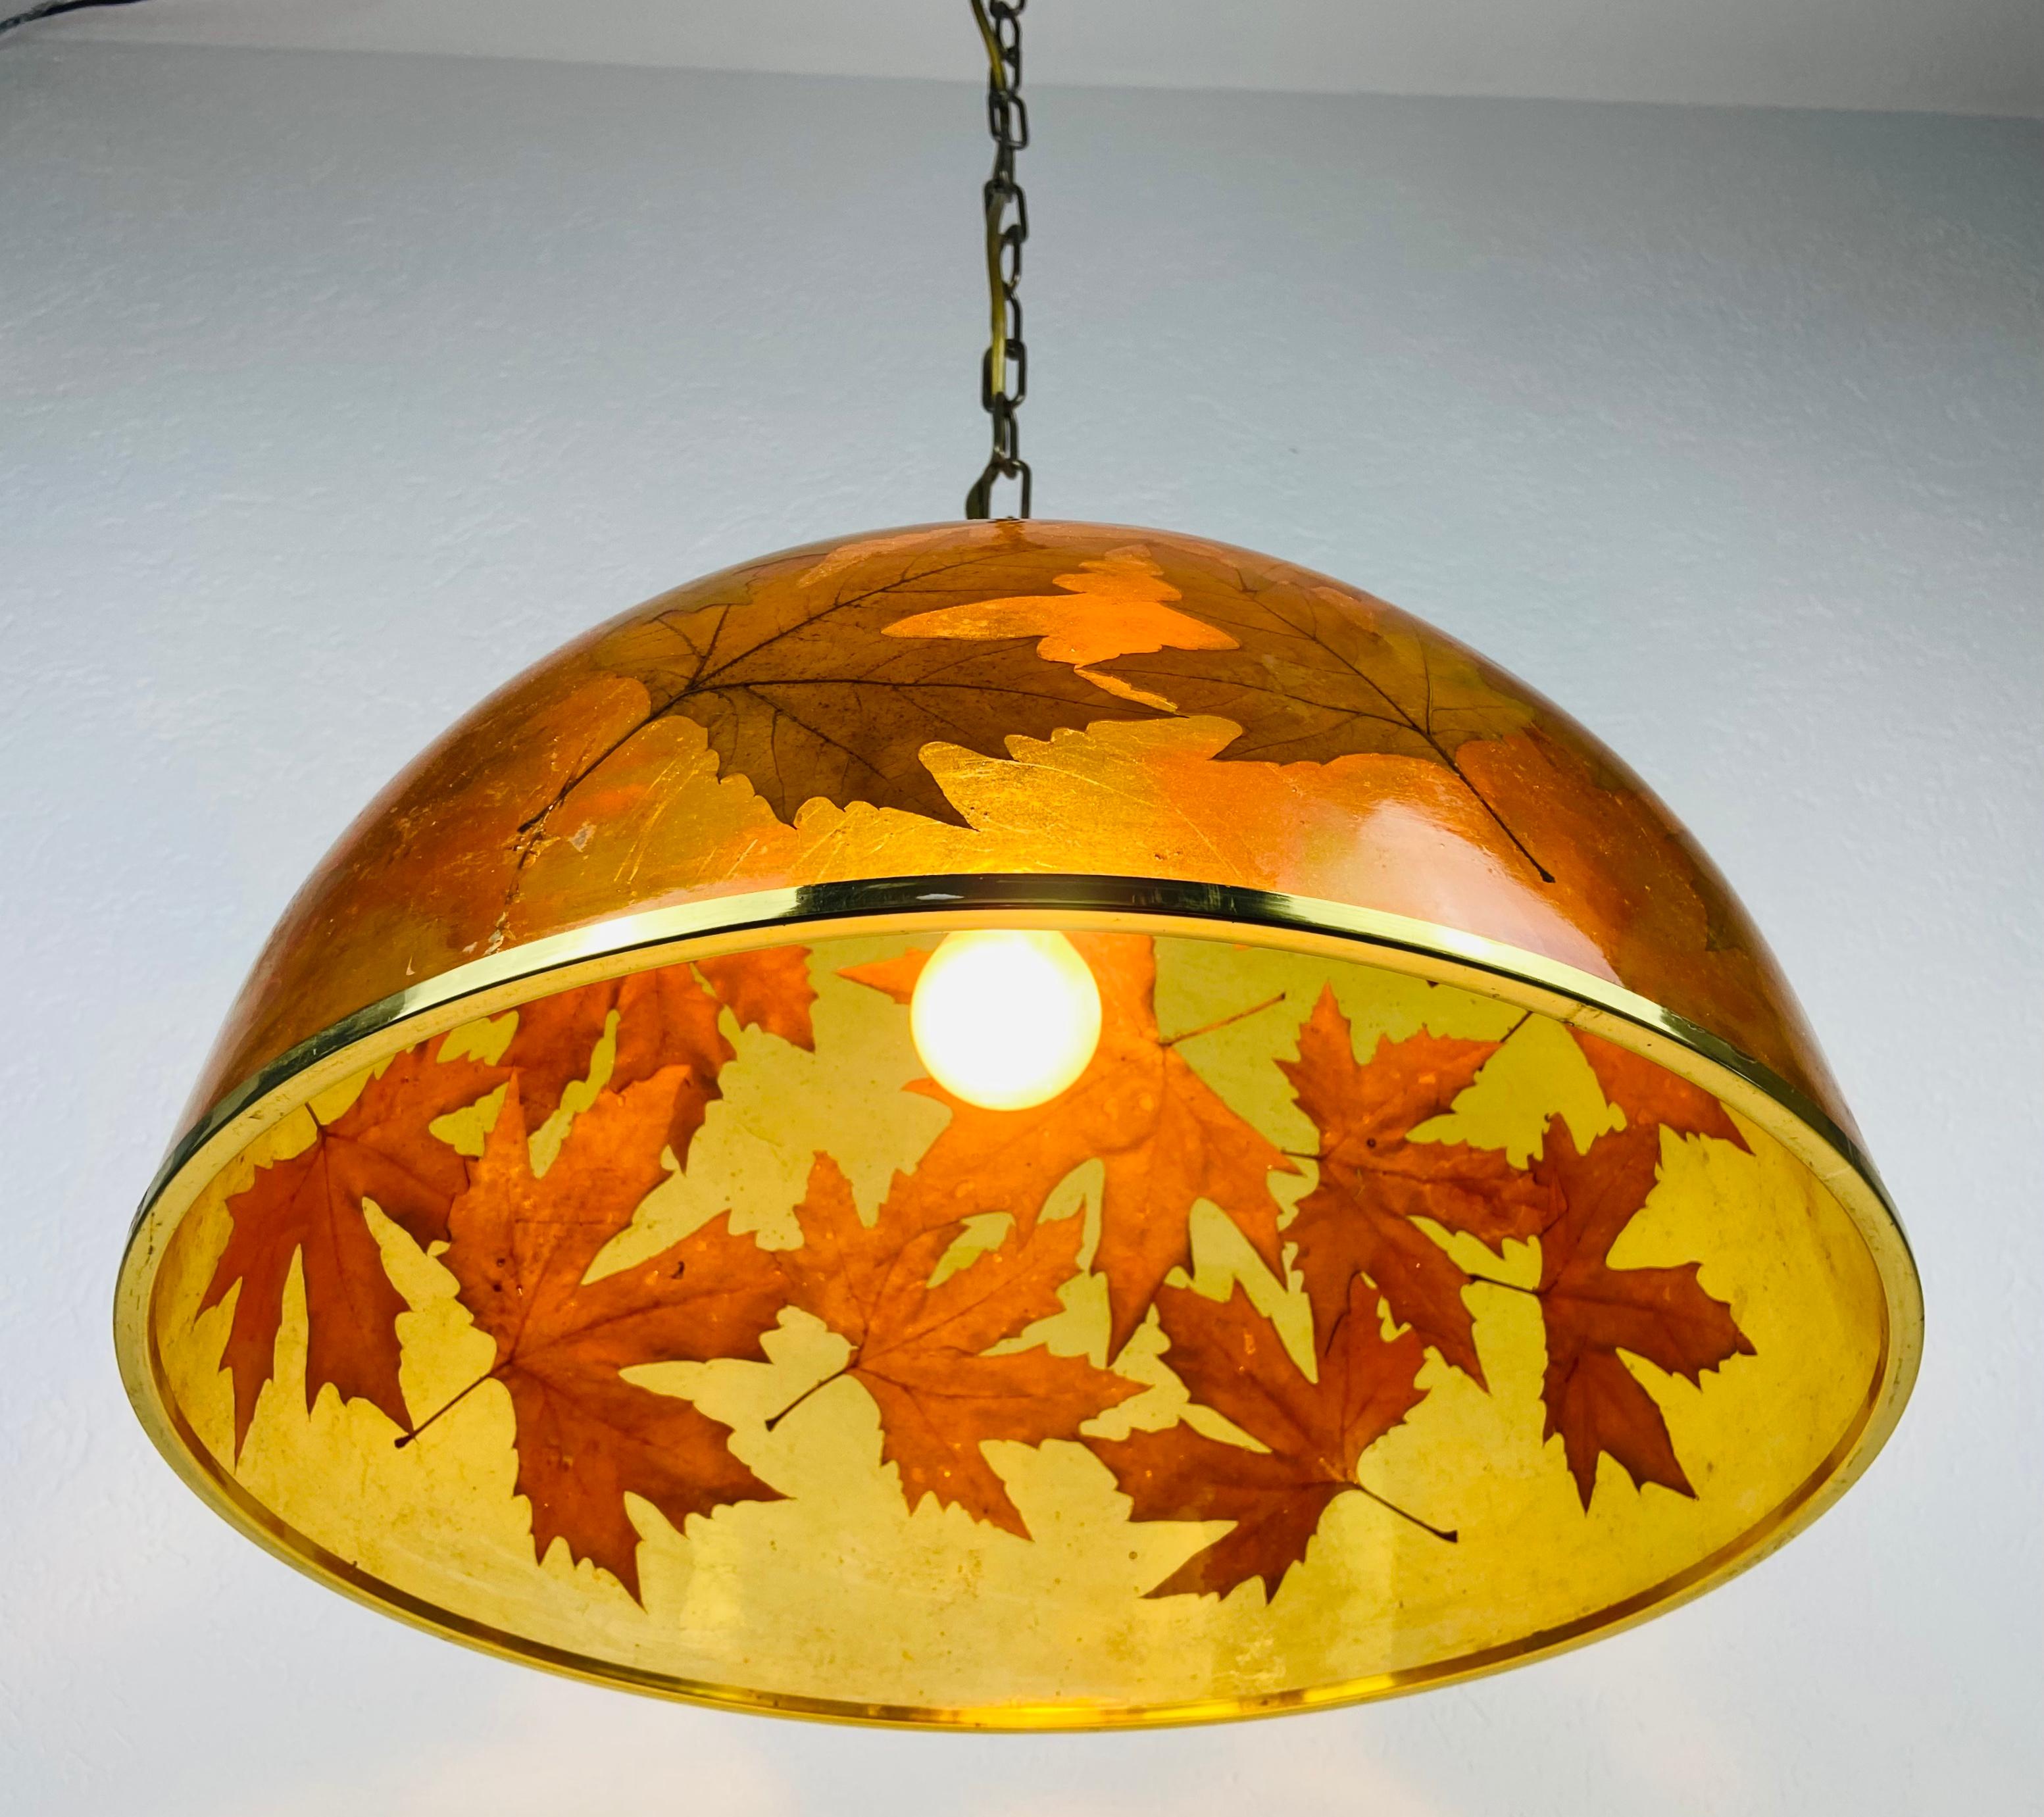 Midcentury Plexiglass Pendant Lamp with Real Leaves, Germany, 1960s For Sale 3